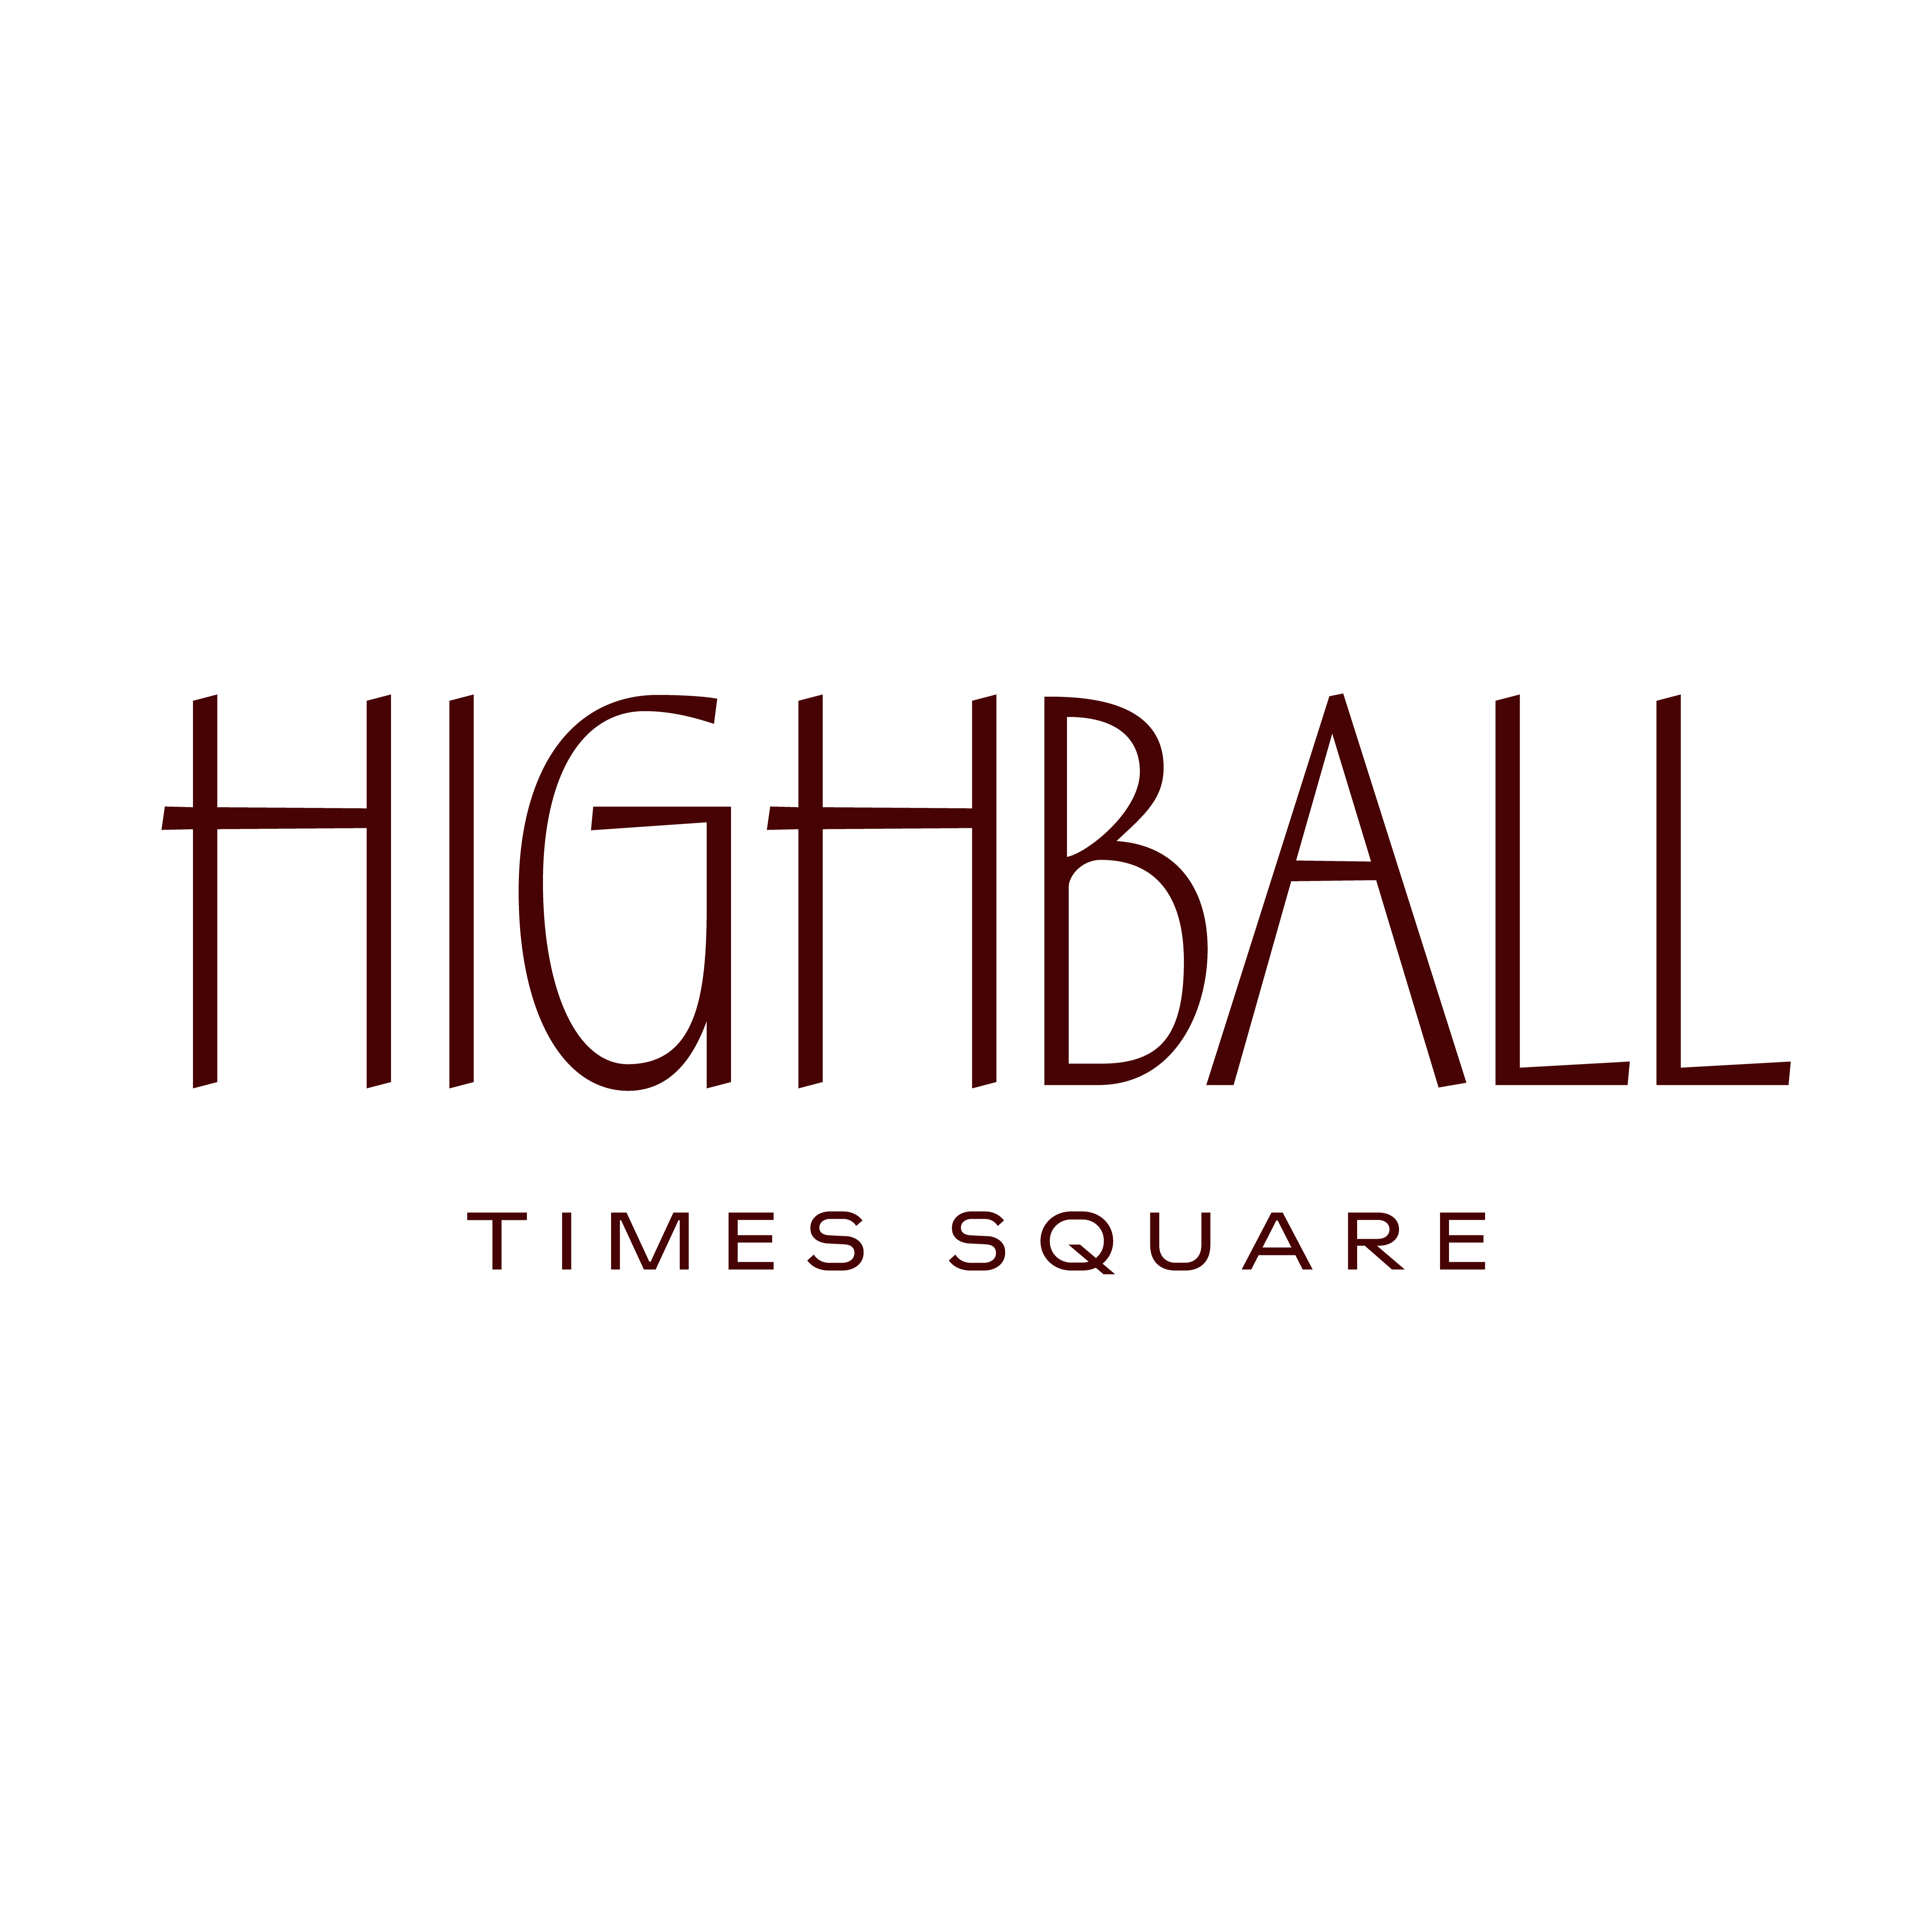 Highball Times Square